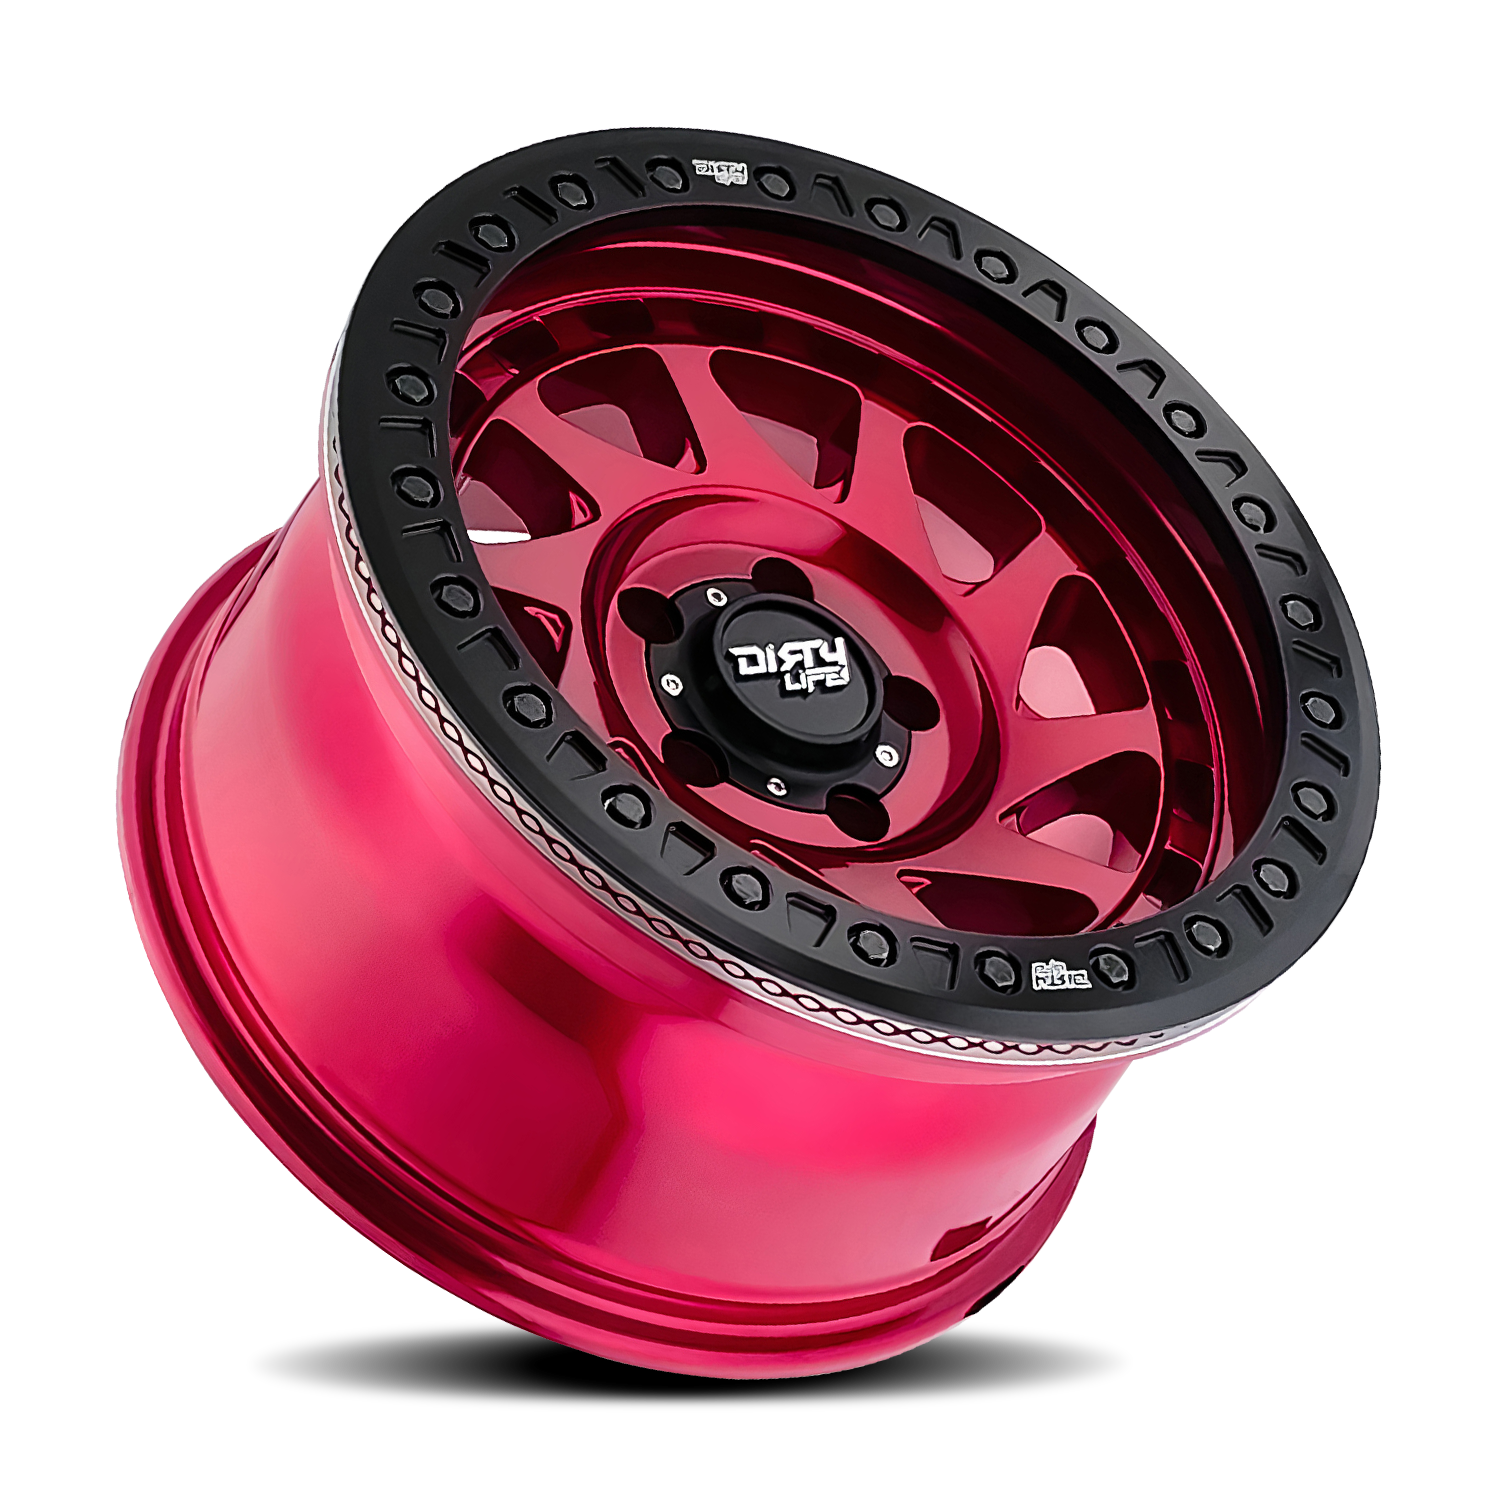 Dirty Life ENIGMA RACE Gloss crimson candy red 17x9 -12 6x139.7mm 106mm